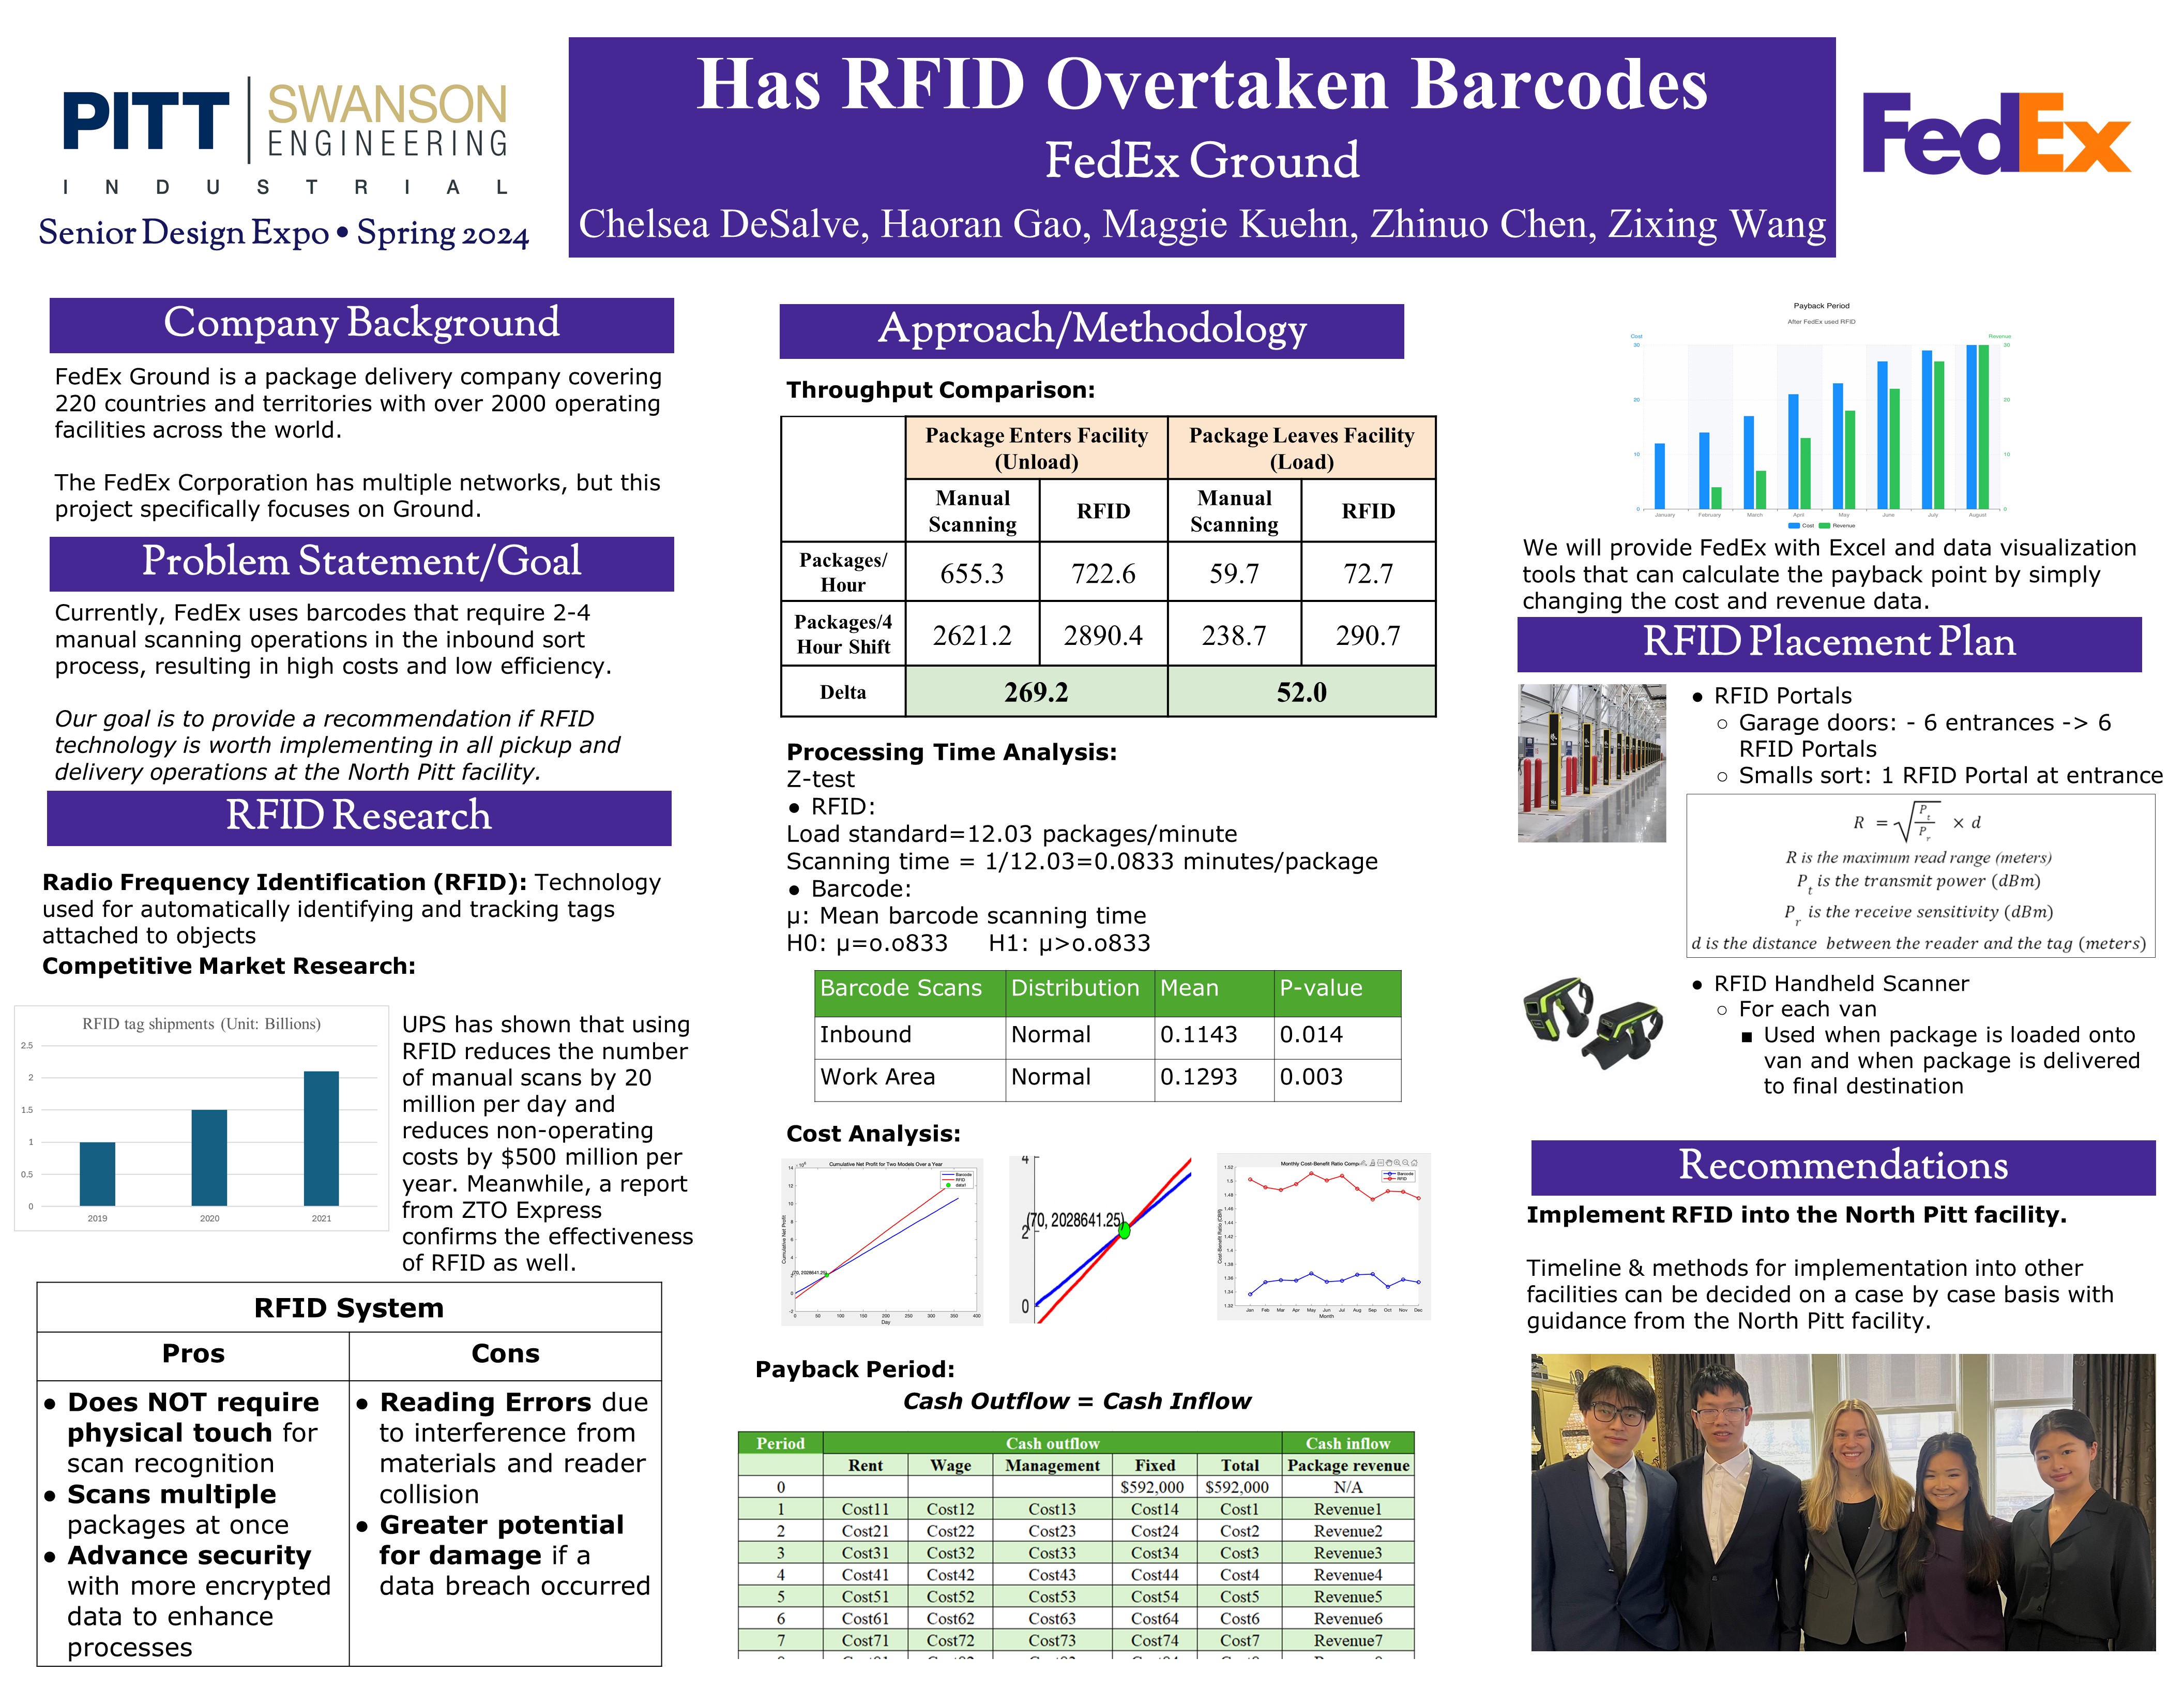 Has RFID overtaken barcodes, FedEx Ground research poster showing overview of project